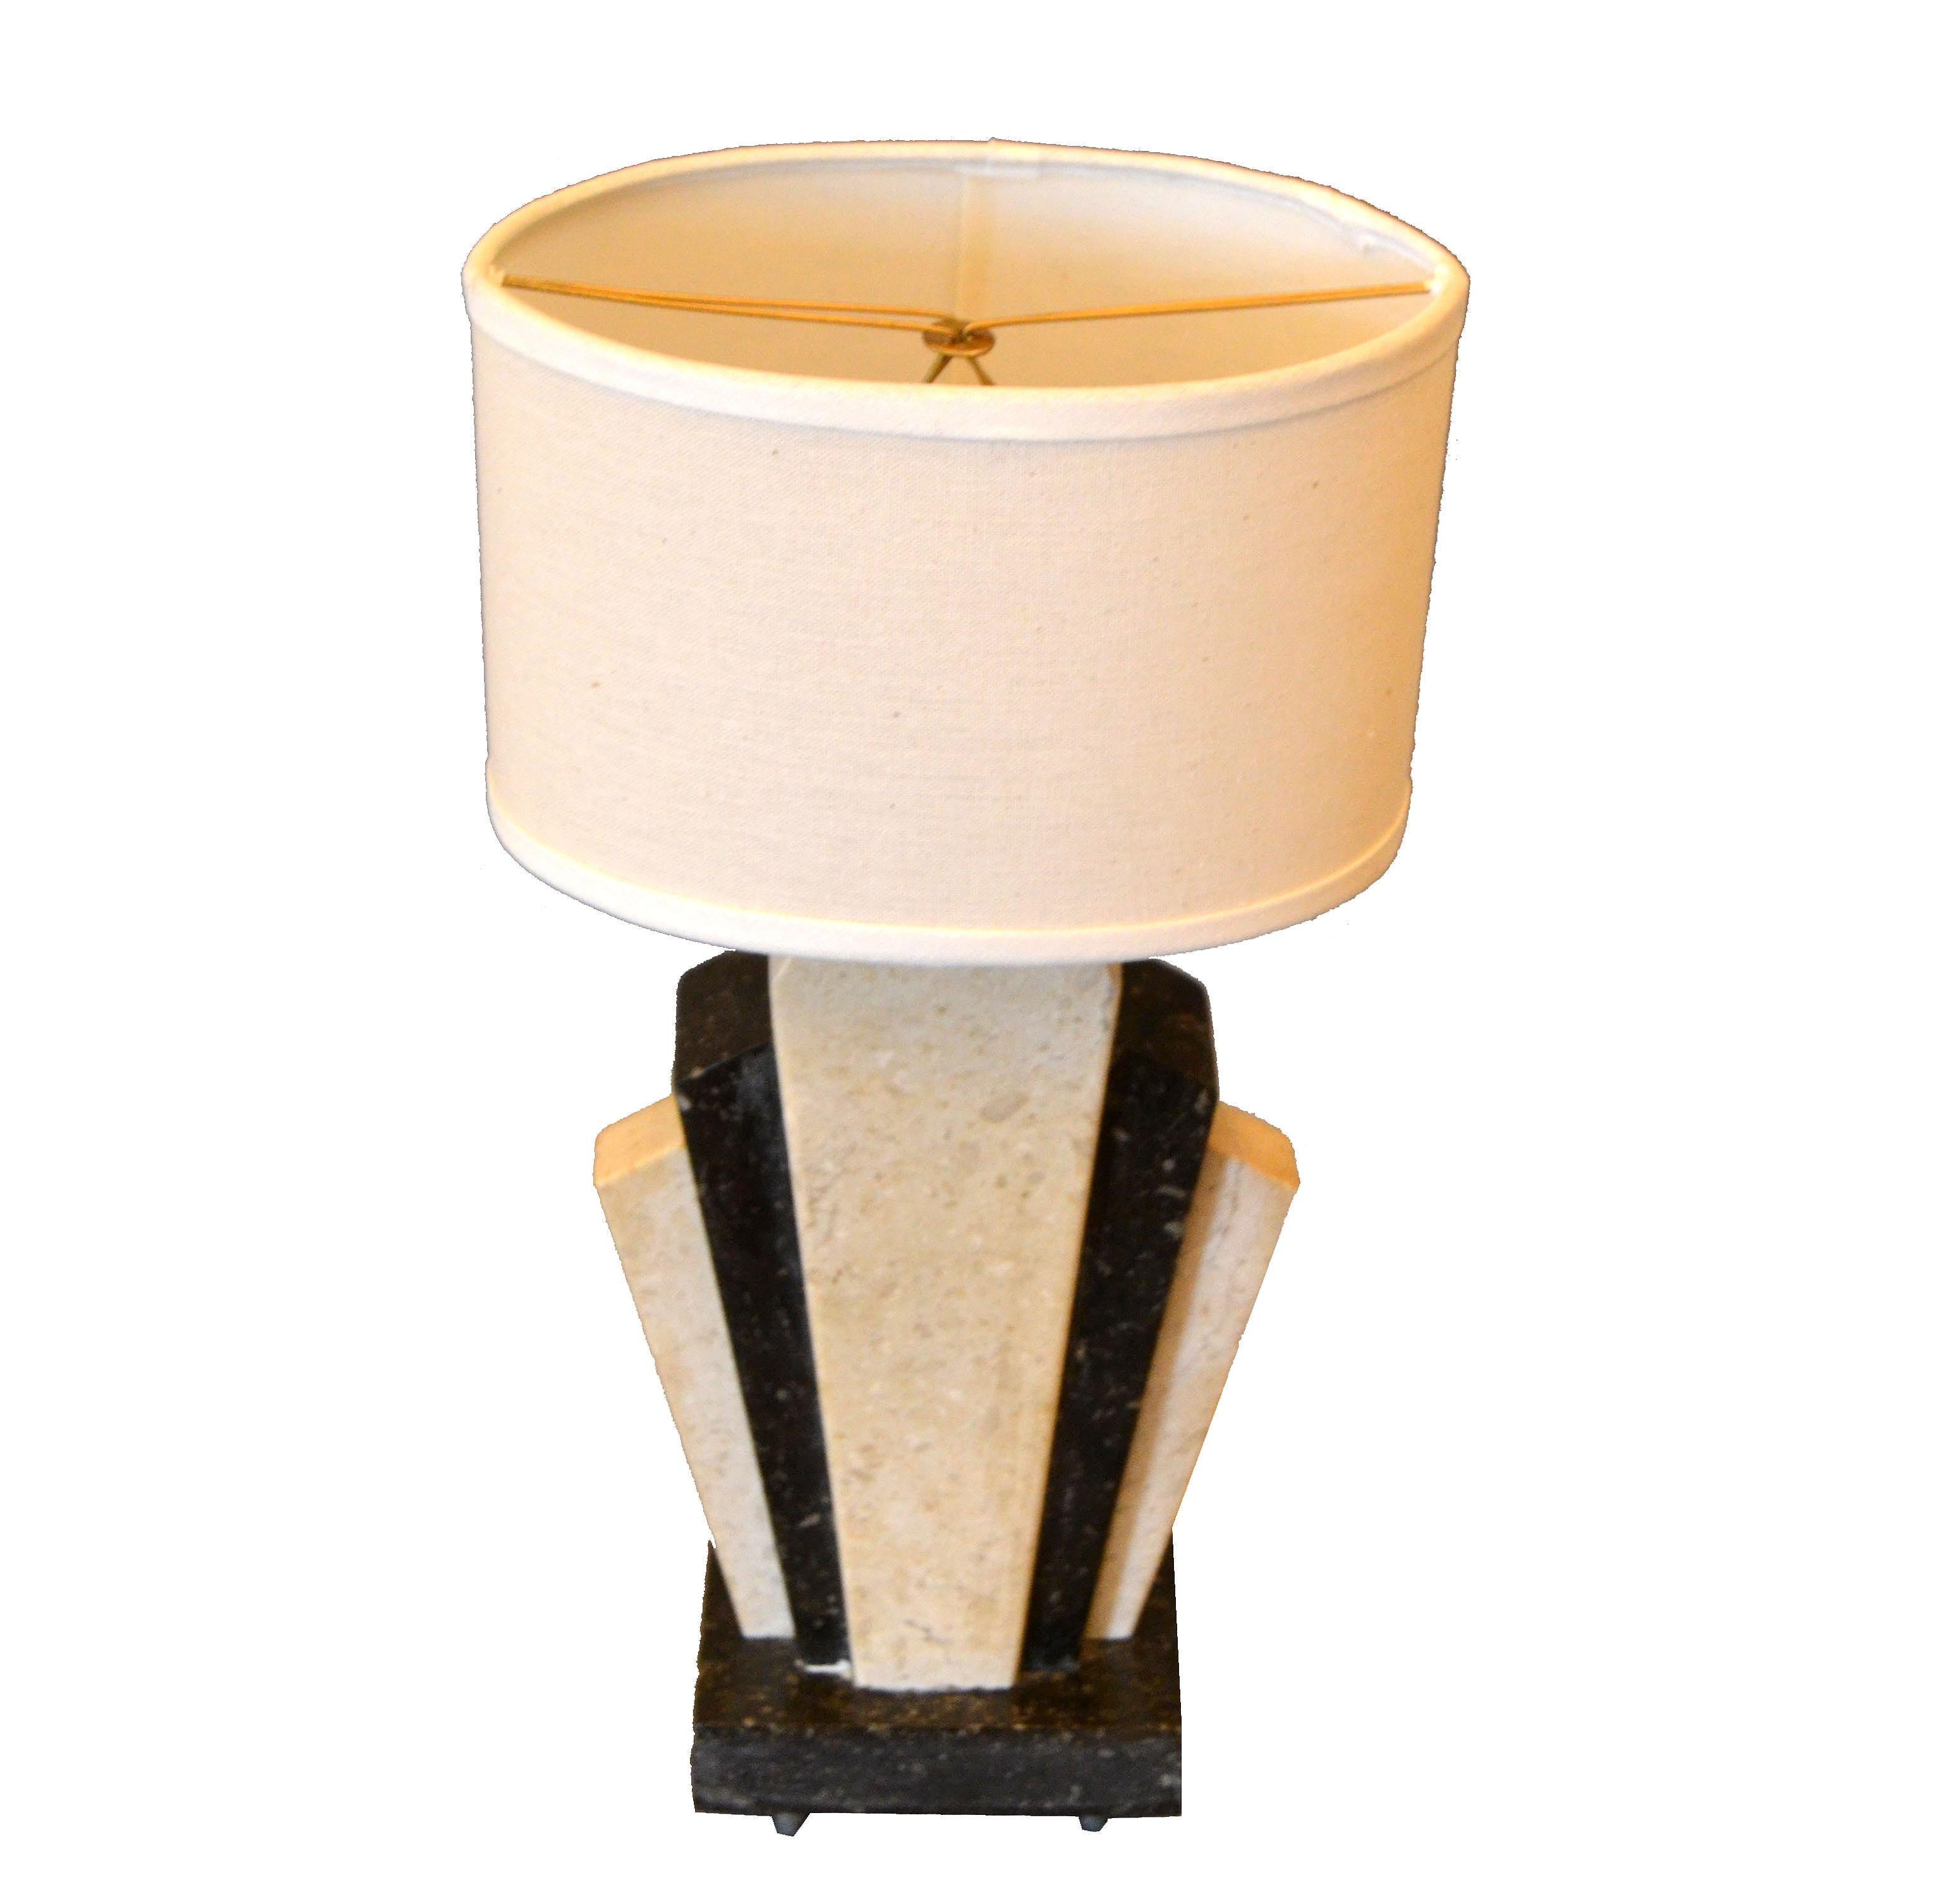 Petite Art Deco Italian Marble Bedside Table Lamp with Oval Shade 3